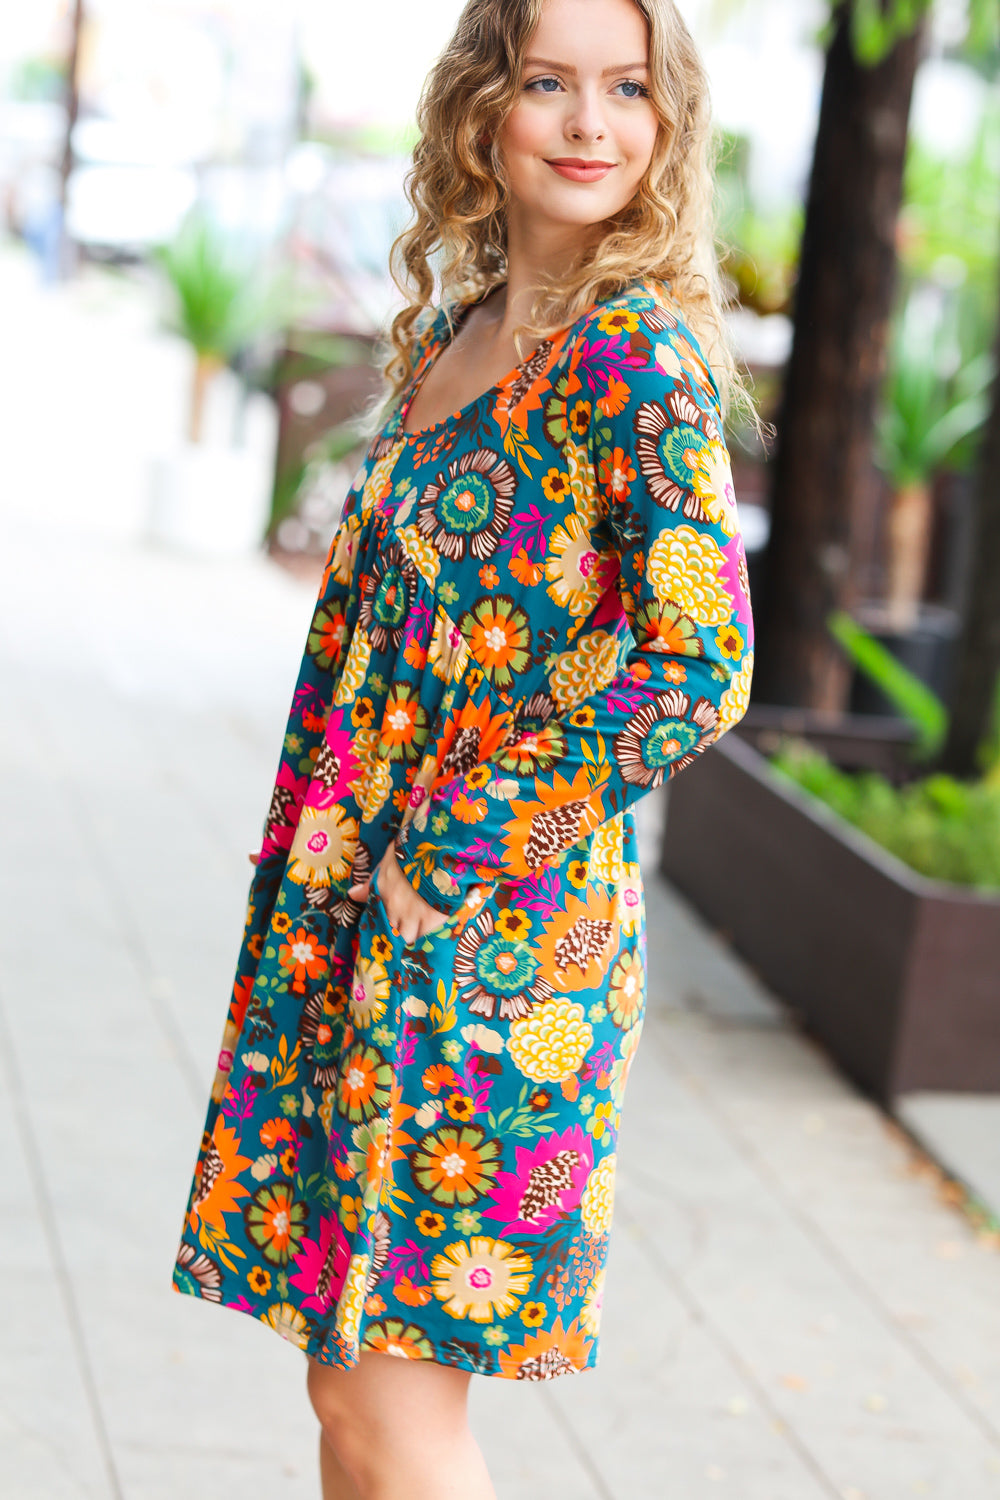 All About It Teal Vibrant Floral Pocketed Dress